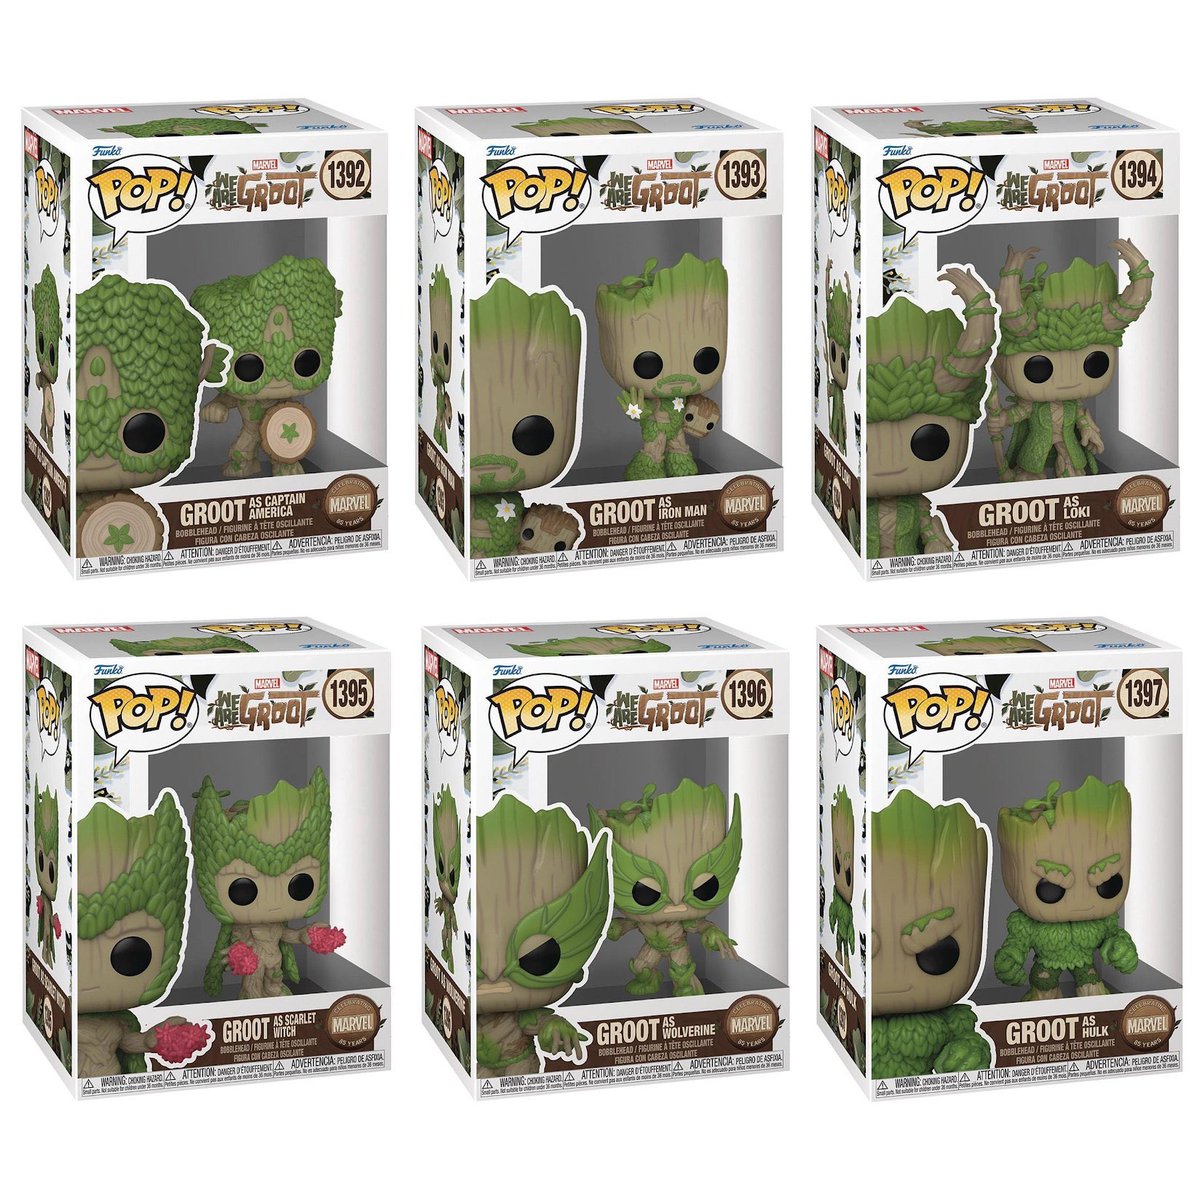 Preorder Now: Funko Pop! Marvel: 85th Anniversary - We Are Groot 📦 Amazon: amzn.to/3wrbtC9 🌍 Ent Earth: ee.toys/Y8UTBR * No Charge Until it Ships #Ad #Funko #FunkoPop #FunkoPops #FunkoPopVinyl #Pop #PopVinyl #FunkoCollector #Collectible #Collectibles #Toy